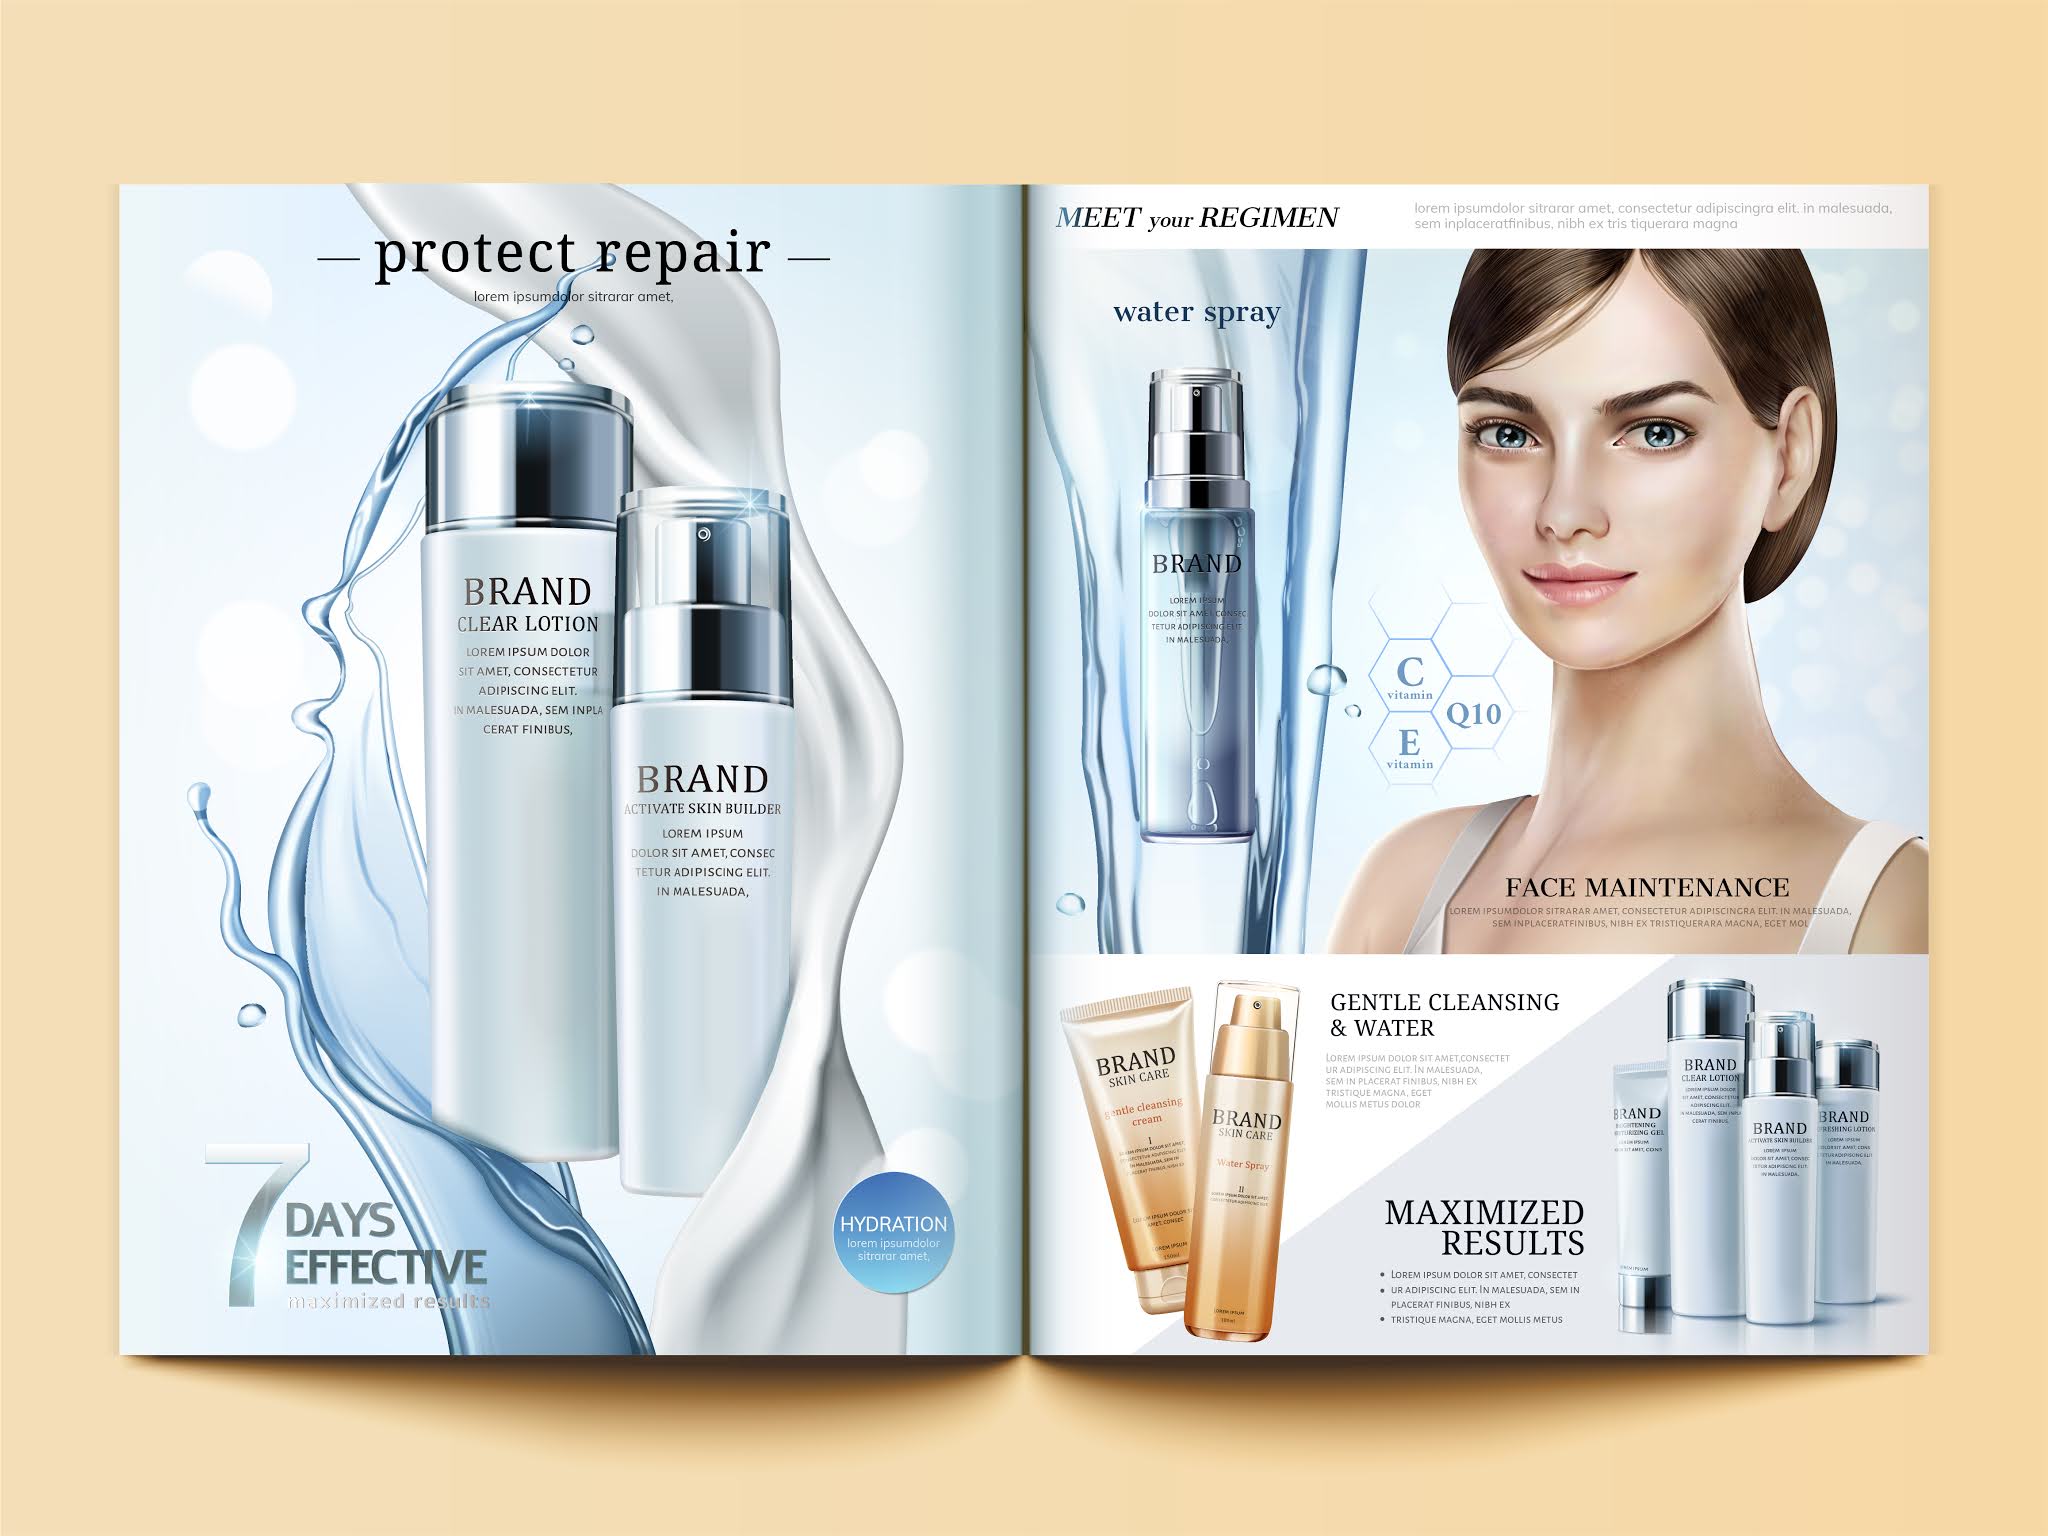 Download the design of a magazine for beauty products in vector format, and you can also convert it into a Photoshop file